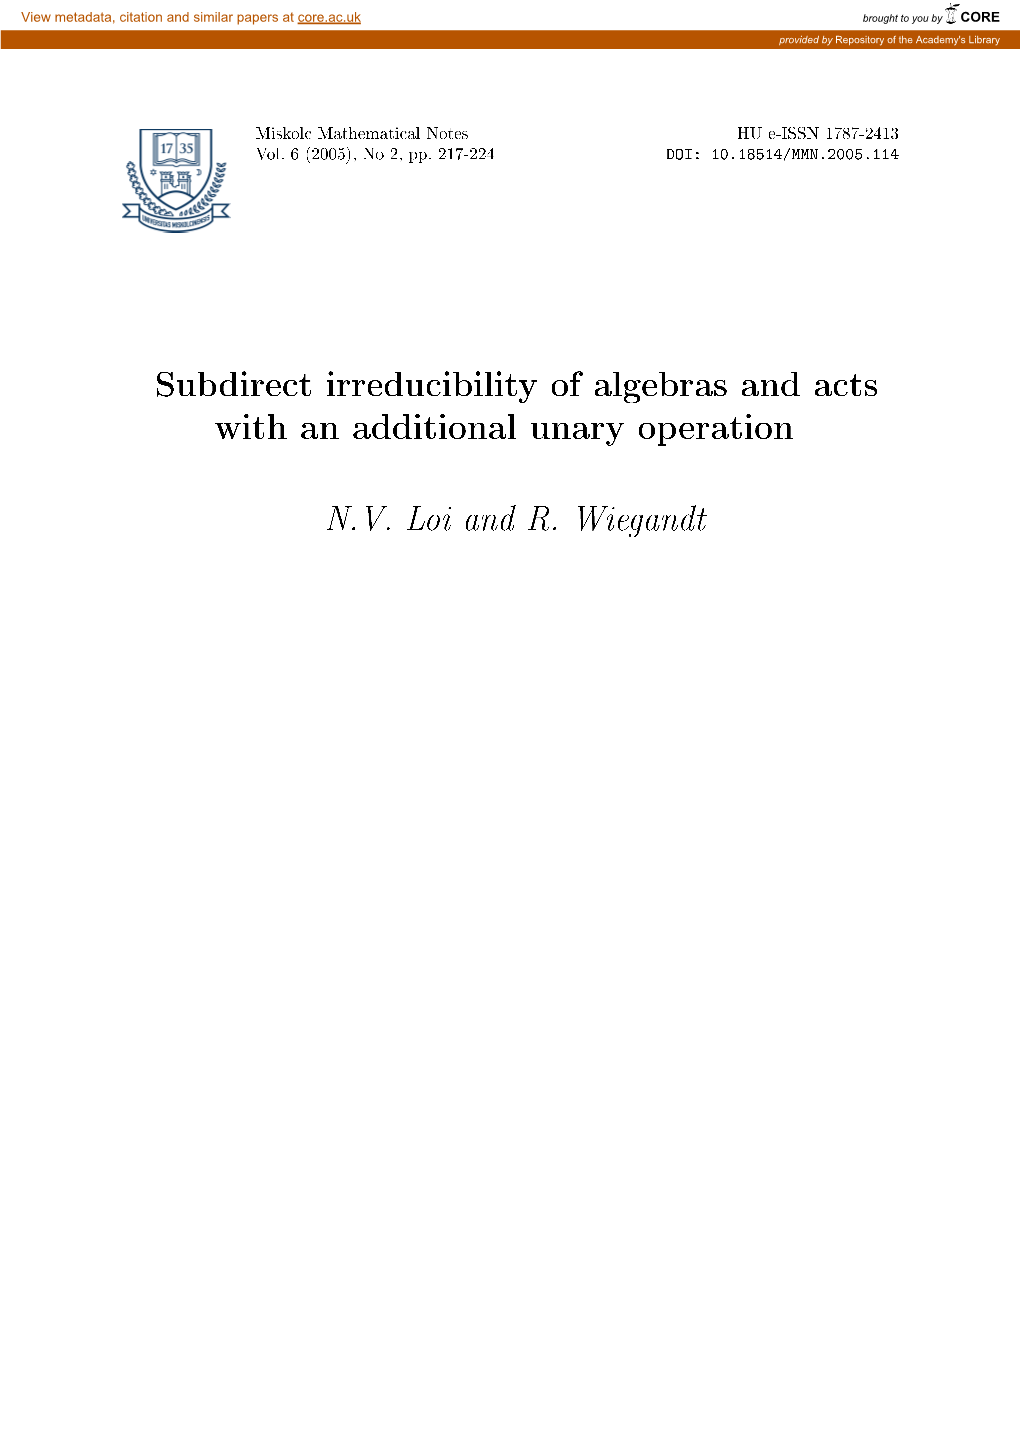 Subdirect Irreducibility of Algebras and Acts with an Additional Unary Operation